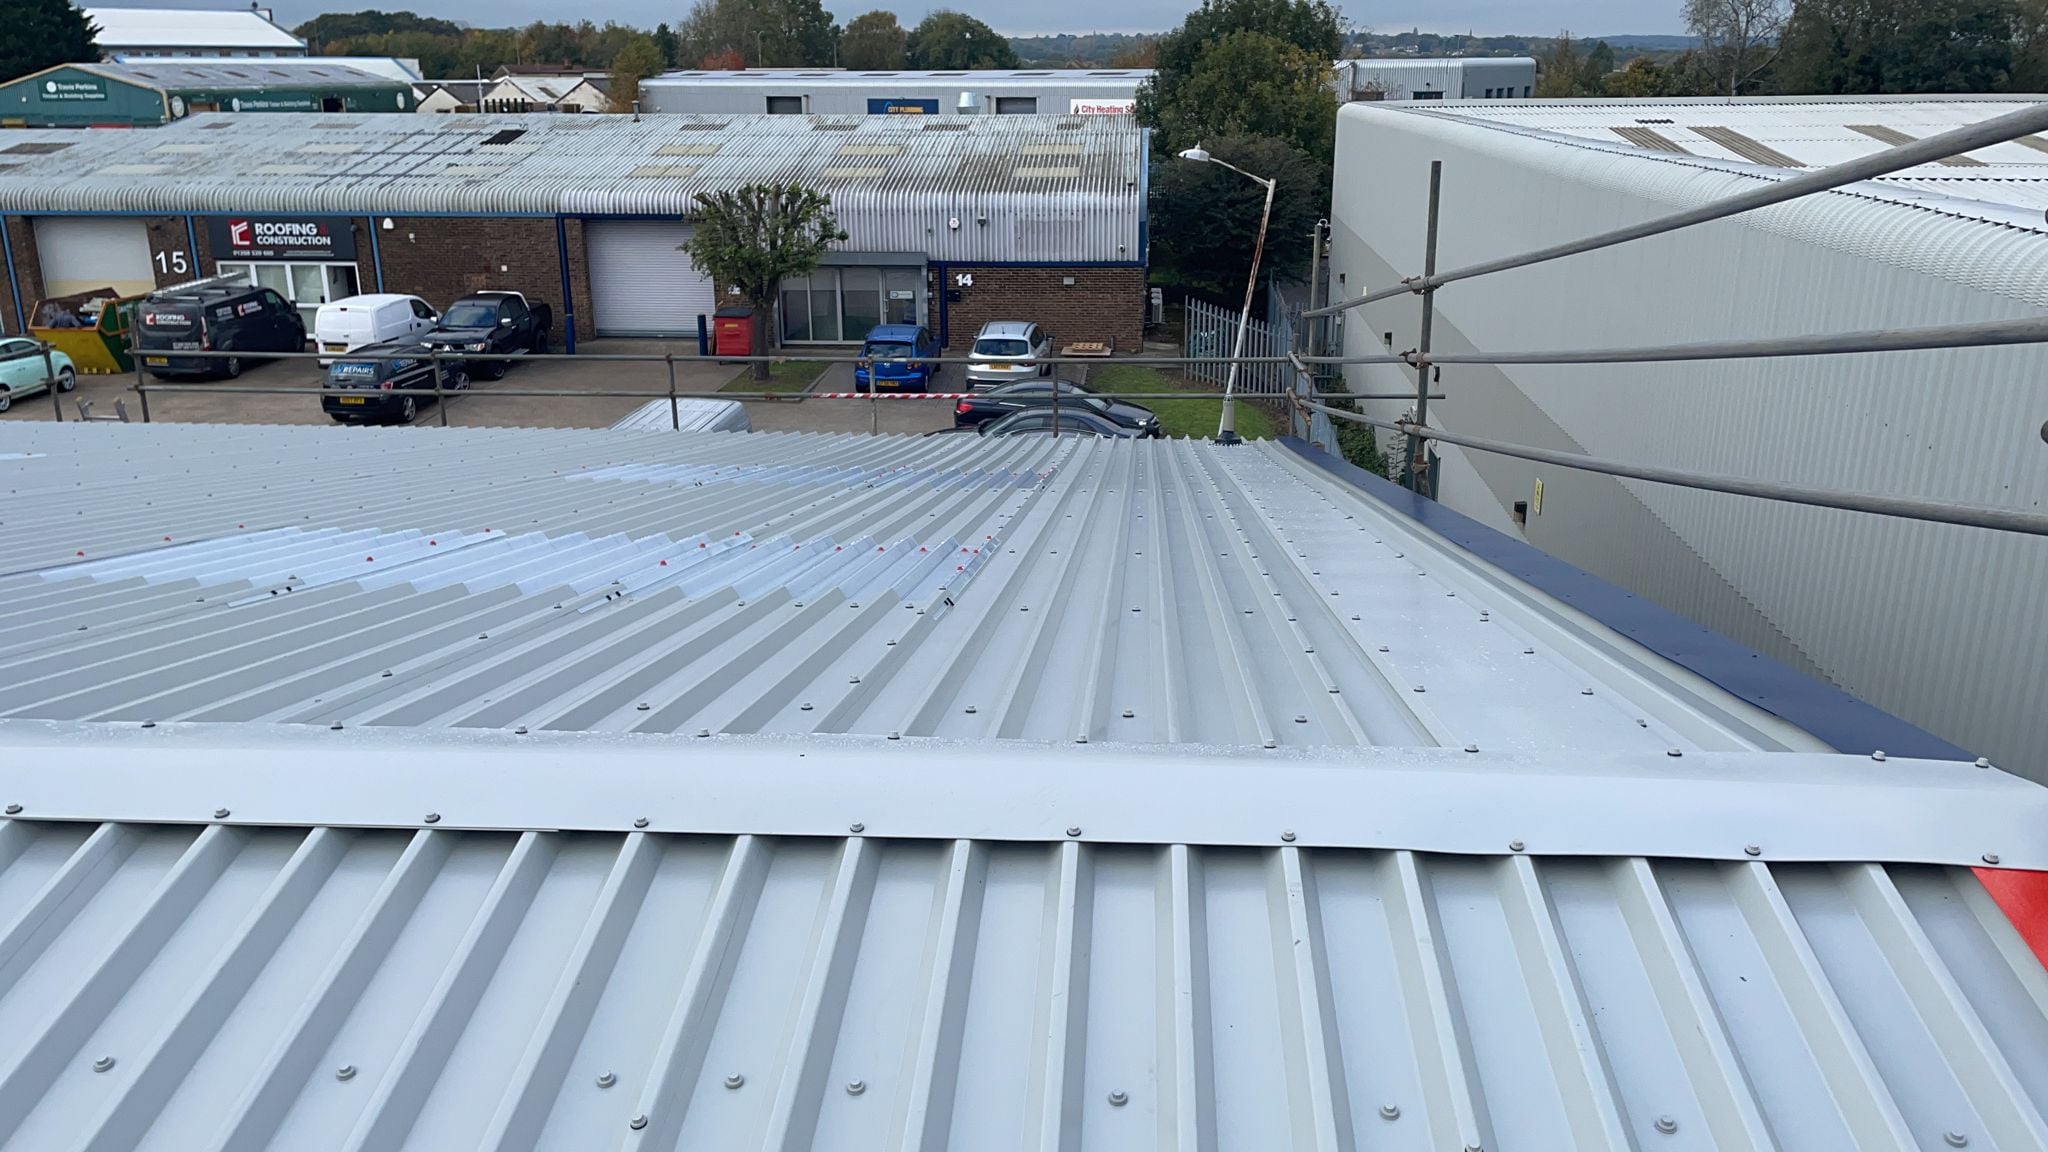 Over roofing to an office and warehouse in Laindon Essex with Rooflights